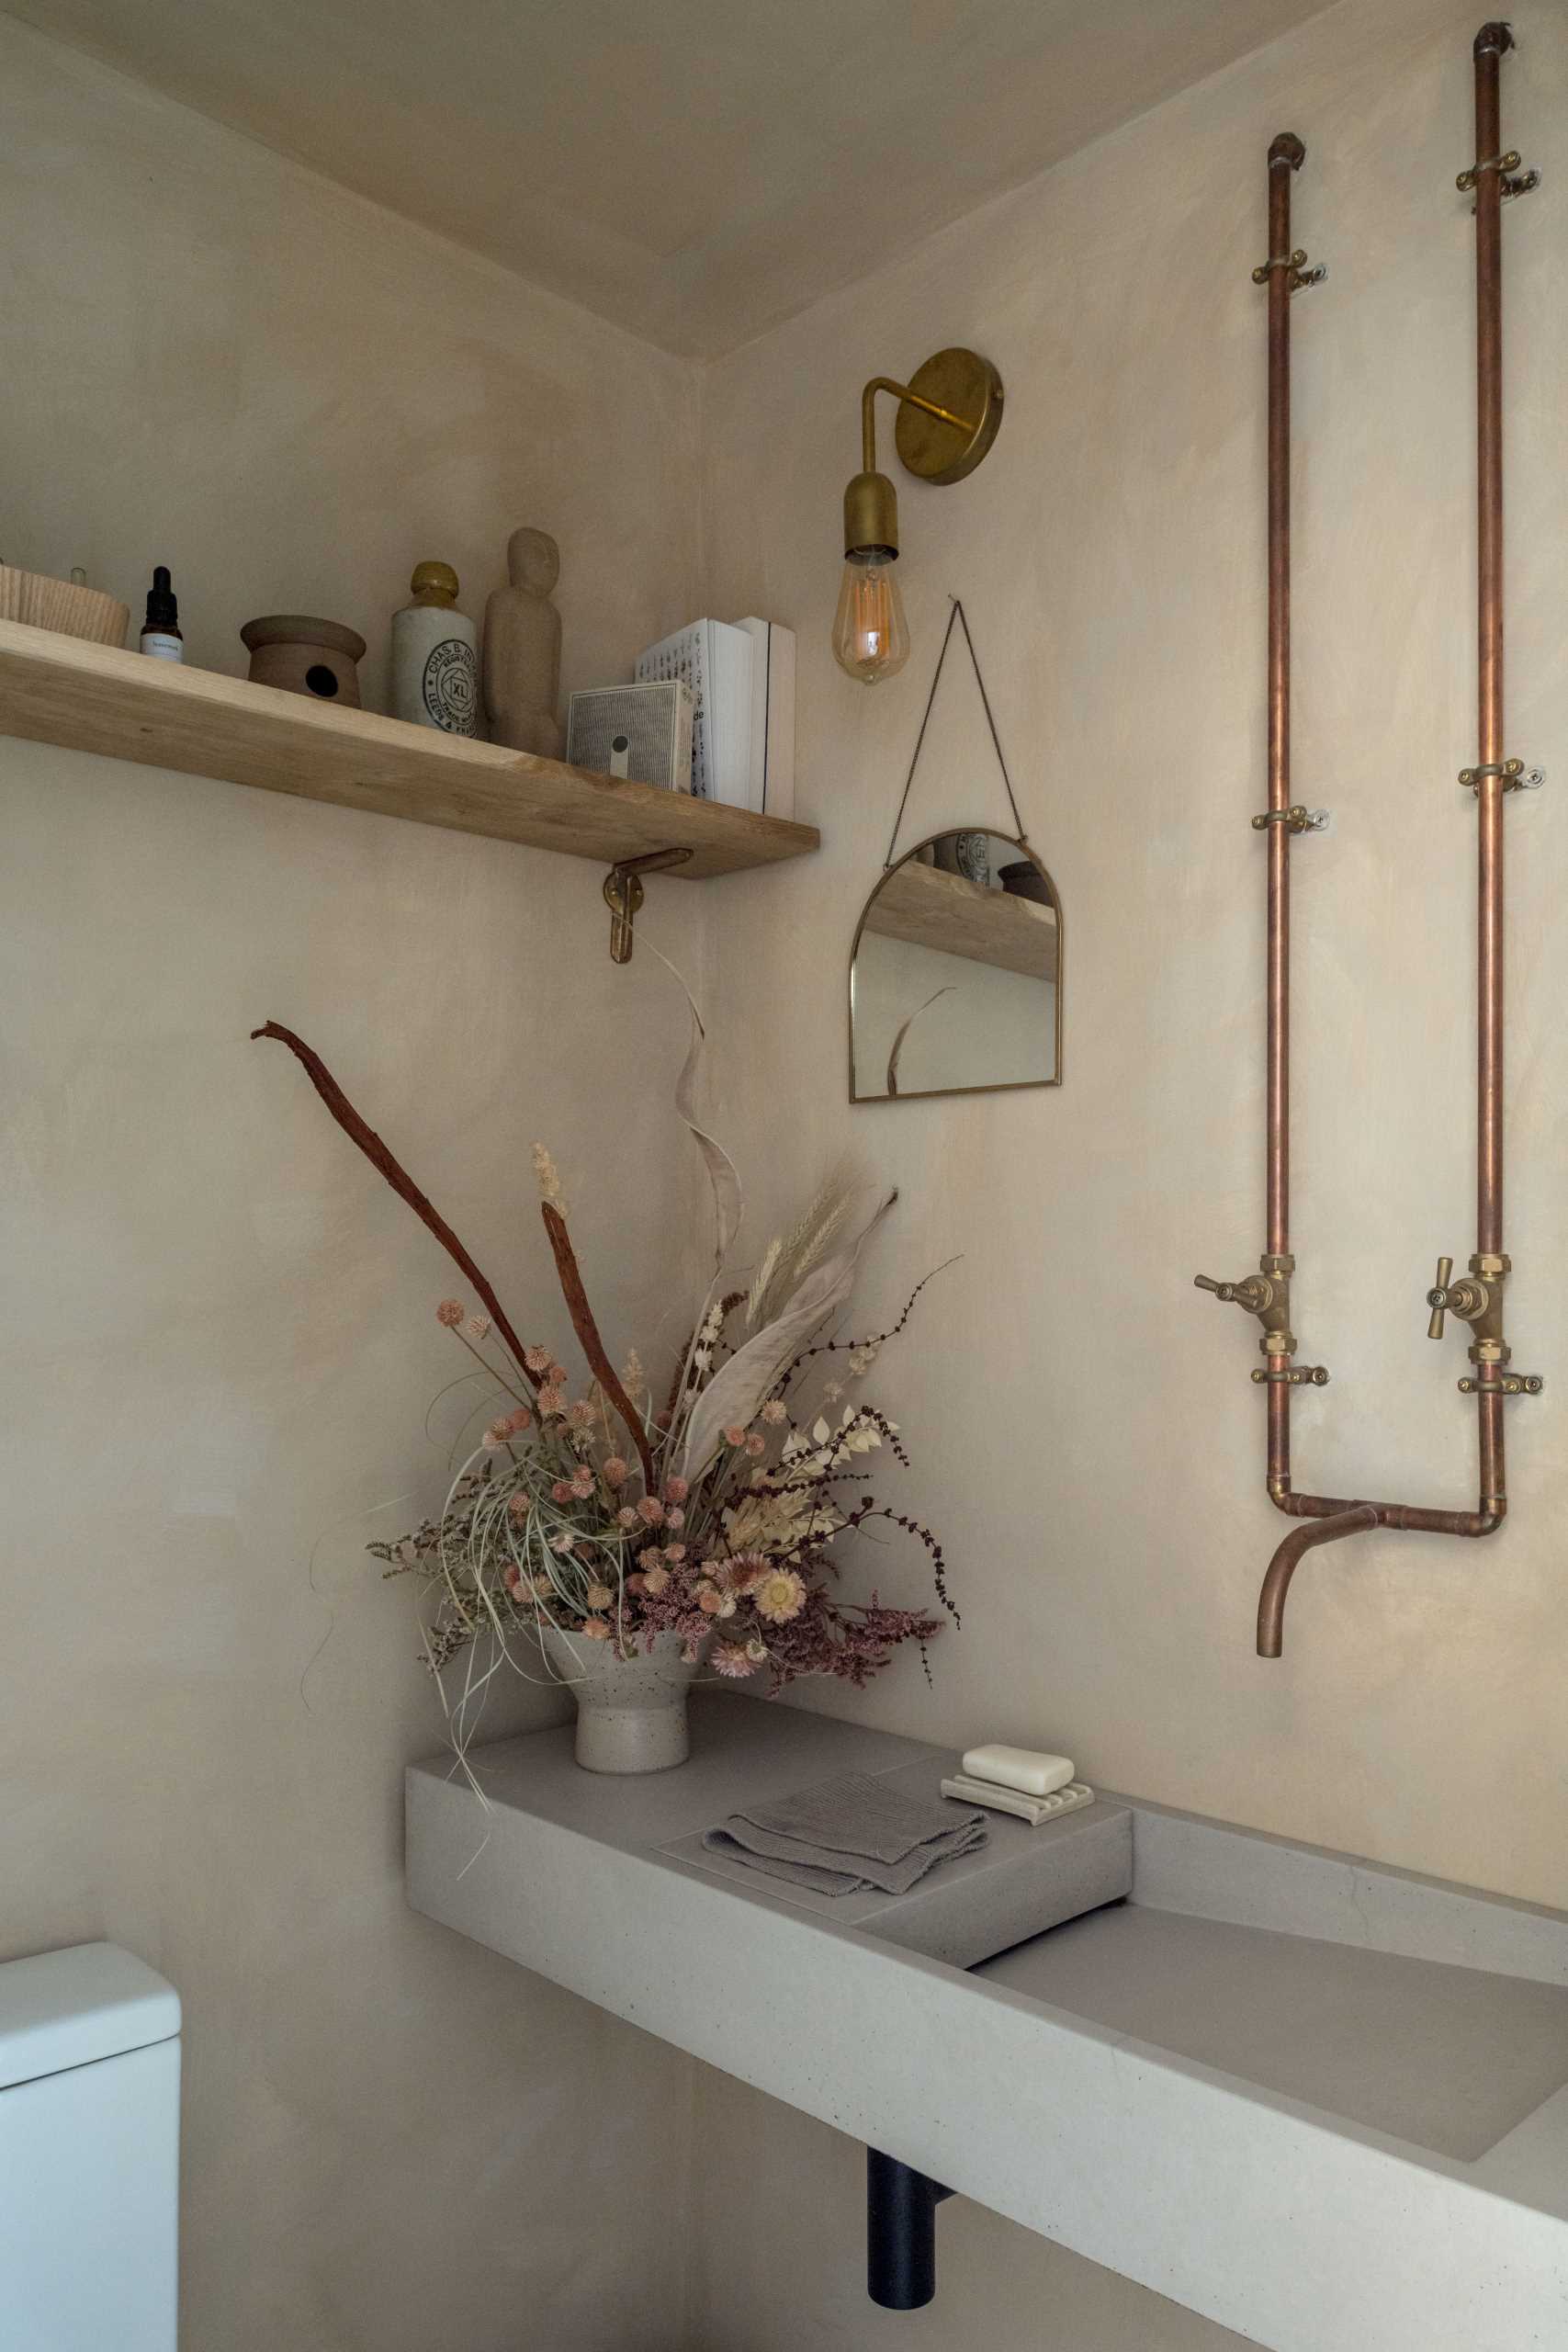 In a powder room, exposed copper pipes become a design element that complements the wall light.